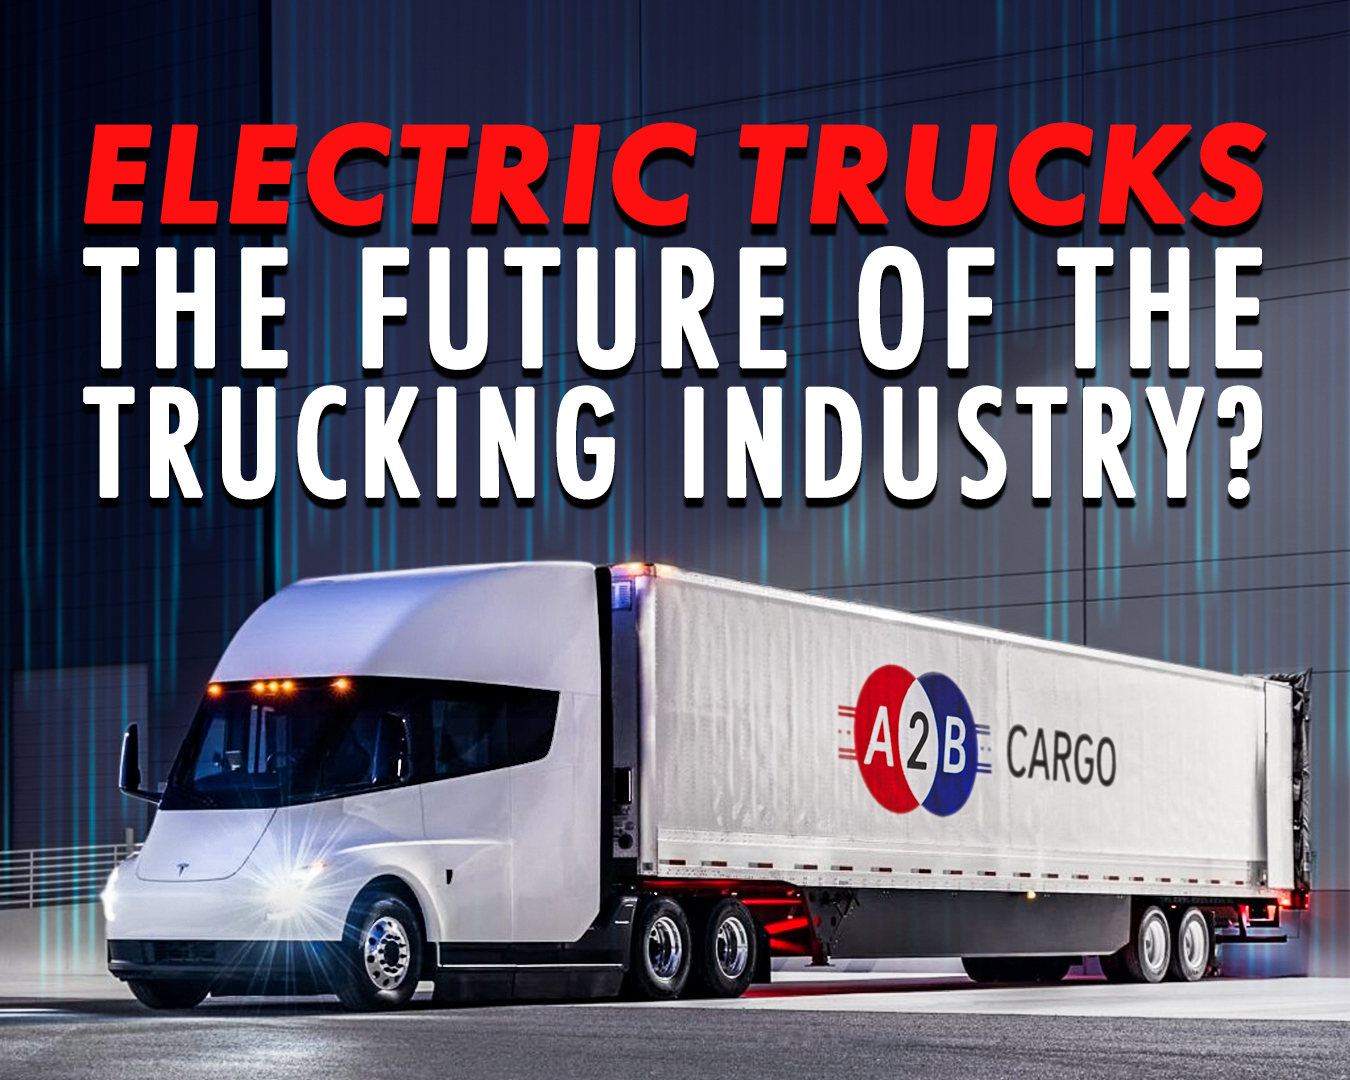 How Electric Trucks Are Revolutionizing the Trucking Industry